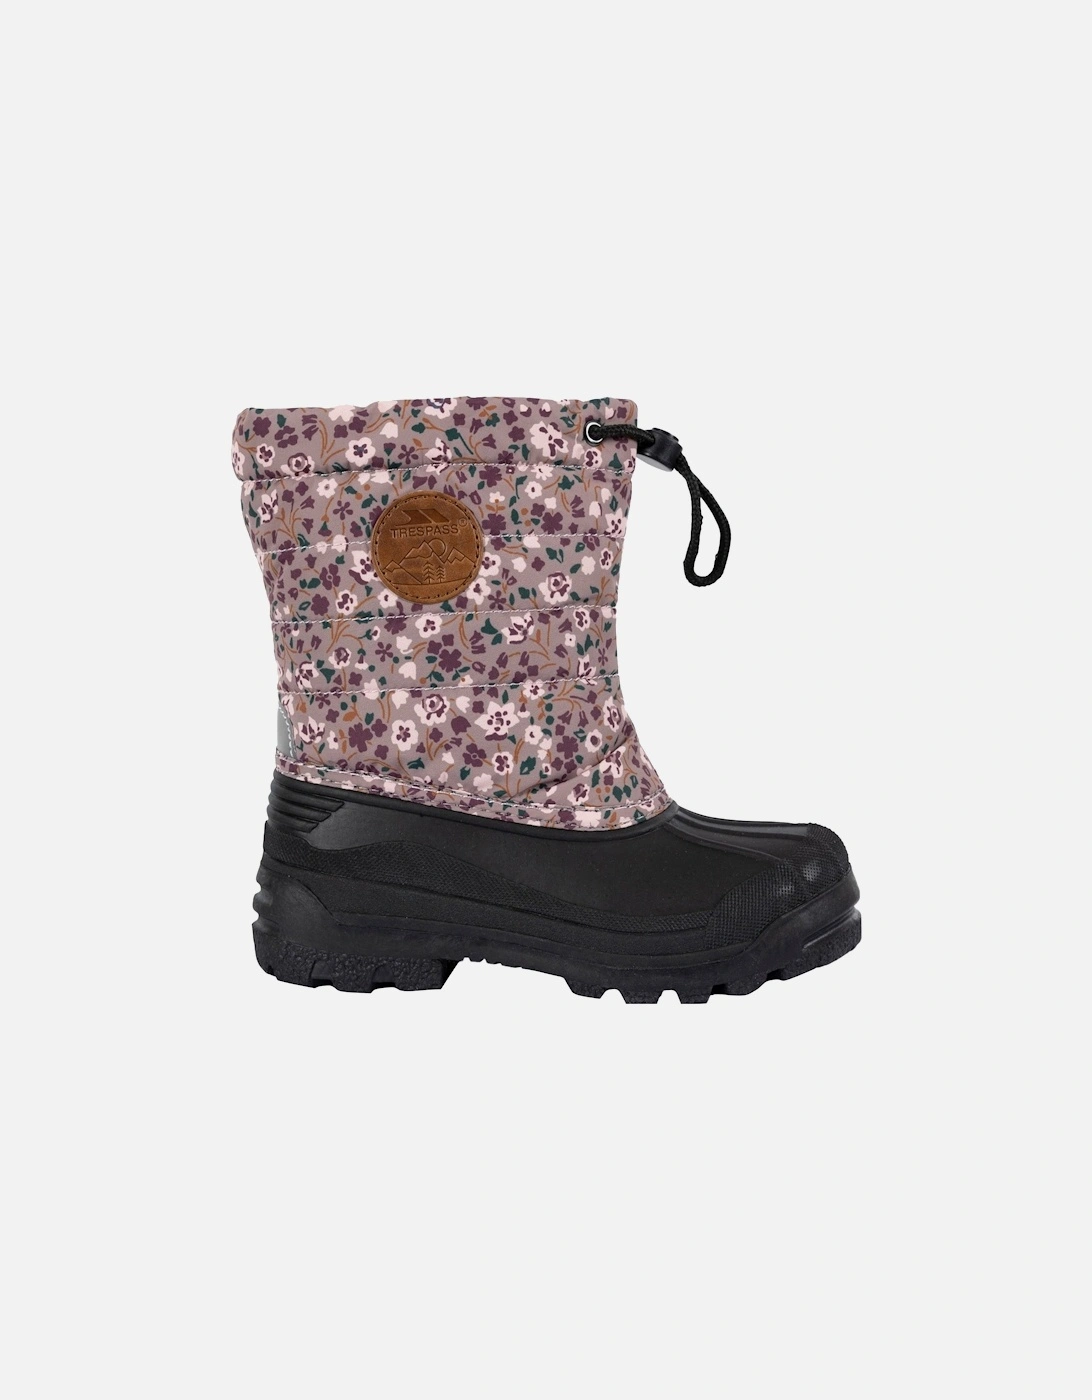 Childrens/Kids Remy Ditsy Print Snow Boots